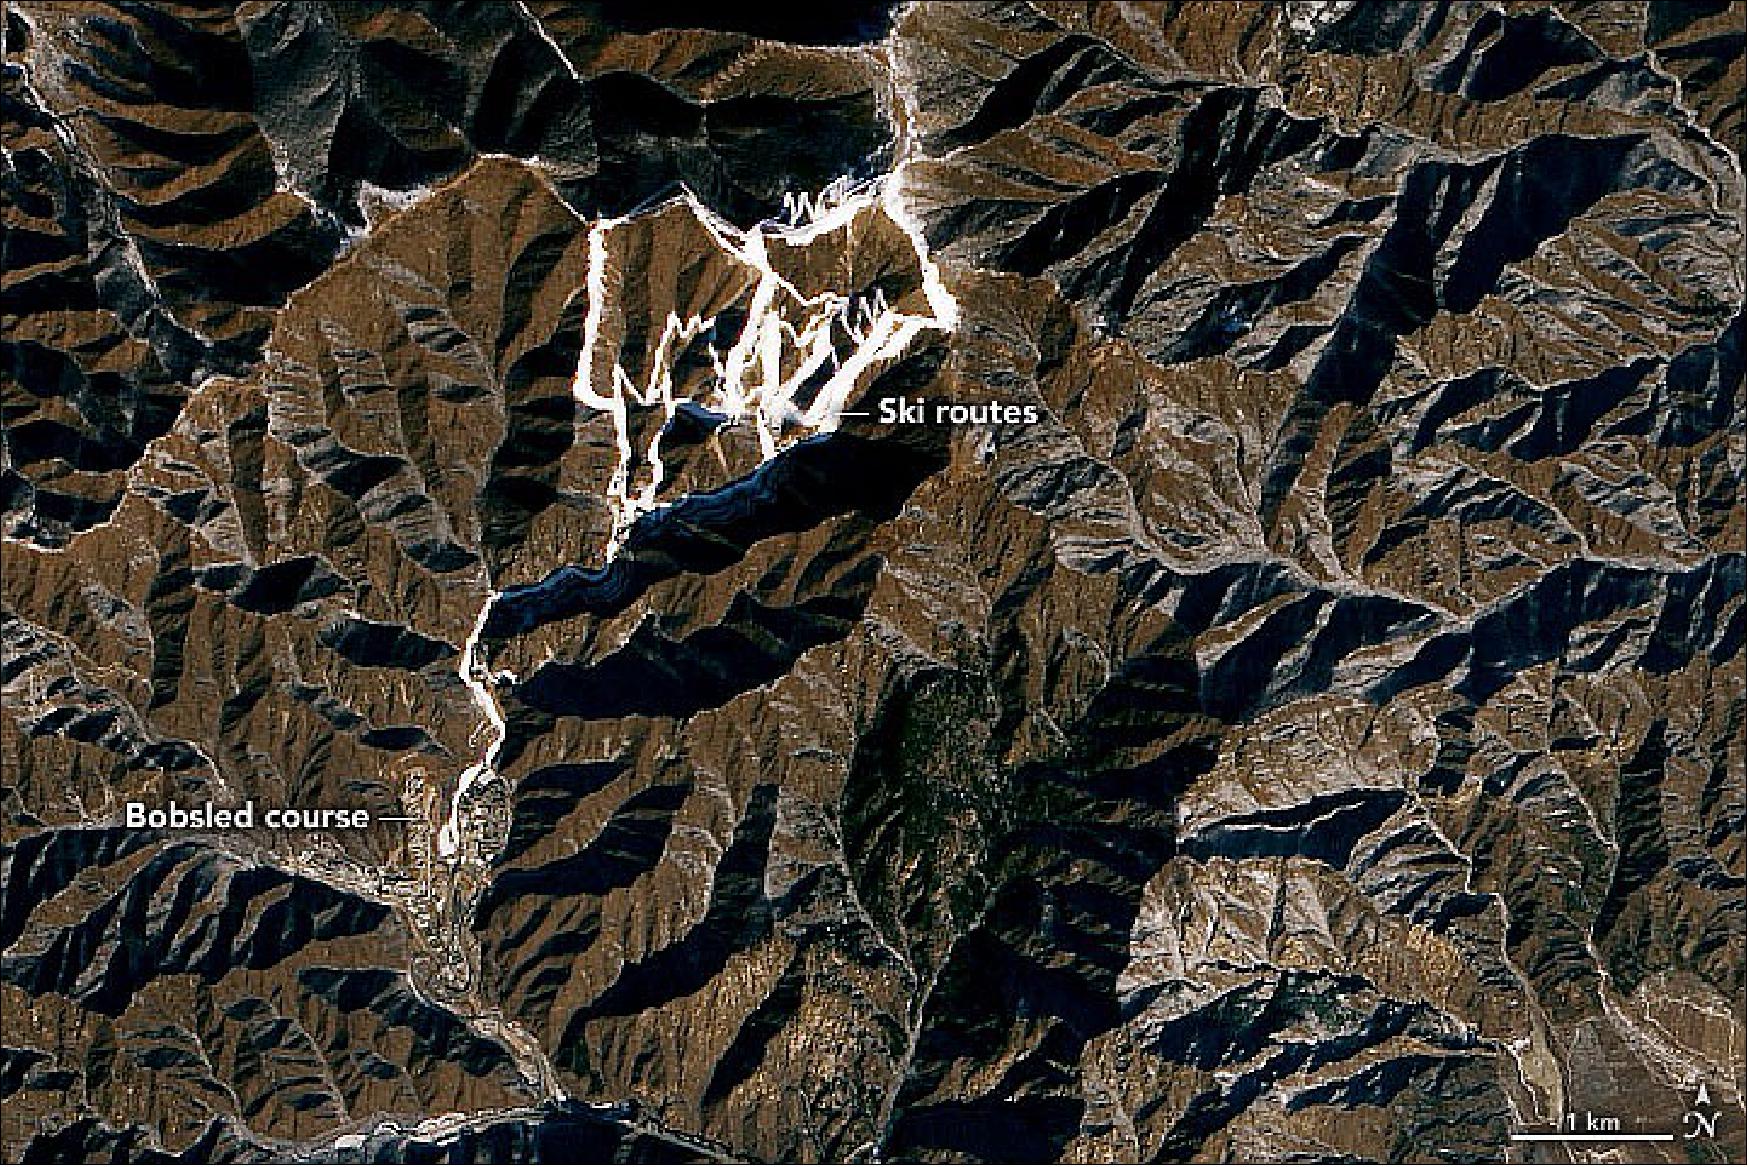 Figure 82: The third cluster of venues is centered in Zhangjiakou, a mountainous area even farther to the northwest of Beijing. Though the inclines are not as steep as in Yanqing, the Zhangjiakou area receives more natural snow. Venues there will host the majority of ski and snowboarding events, including cross-country, nordic combined, freestyle, and biathlon. A newly constructed Beijing-Zhangjiakou intercity railway will transfer people between all three venues in about an hour (image credit: NASA Earth Observatory)